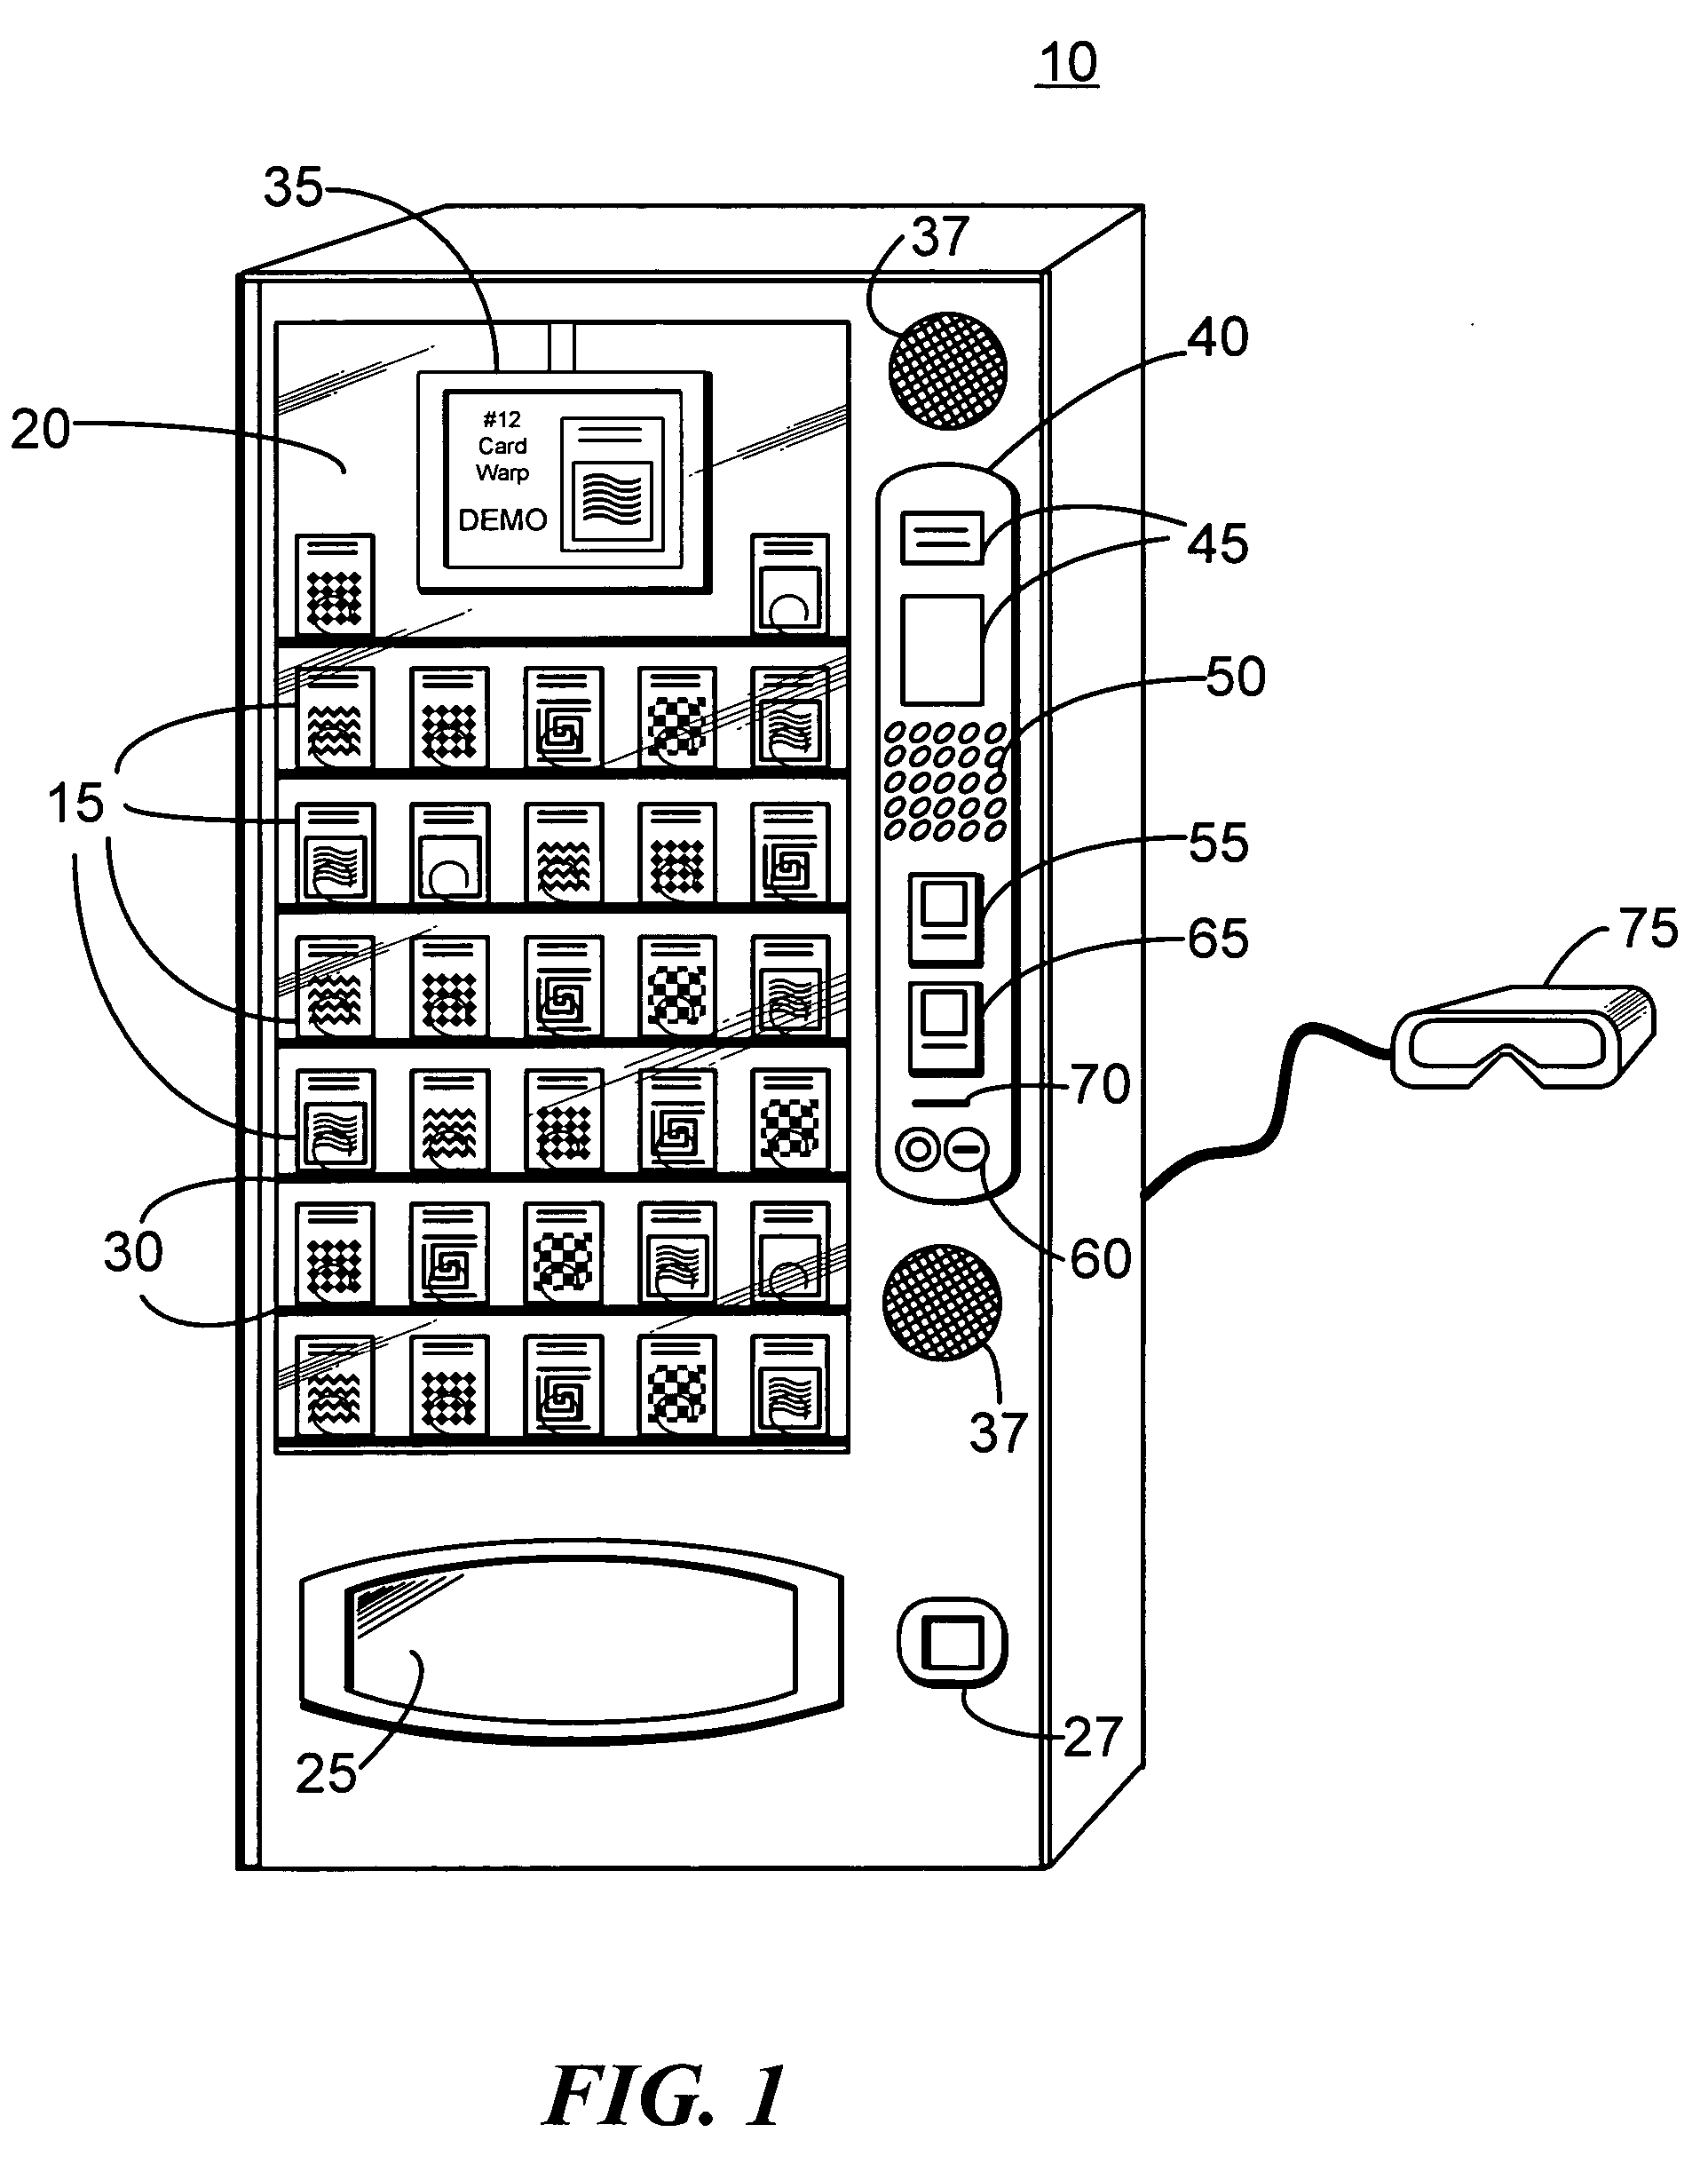 Method and apparatus for vending magic, pranks, and gags